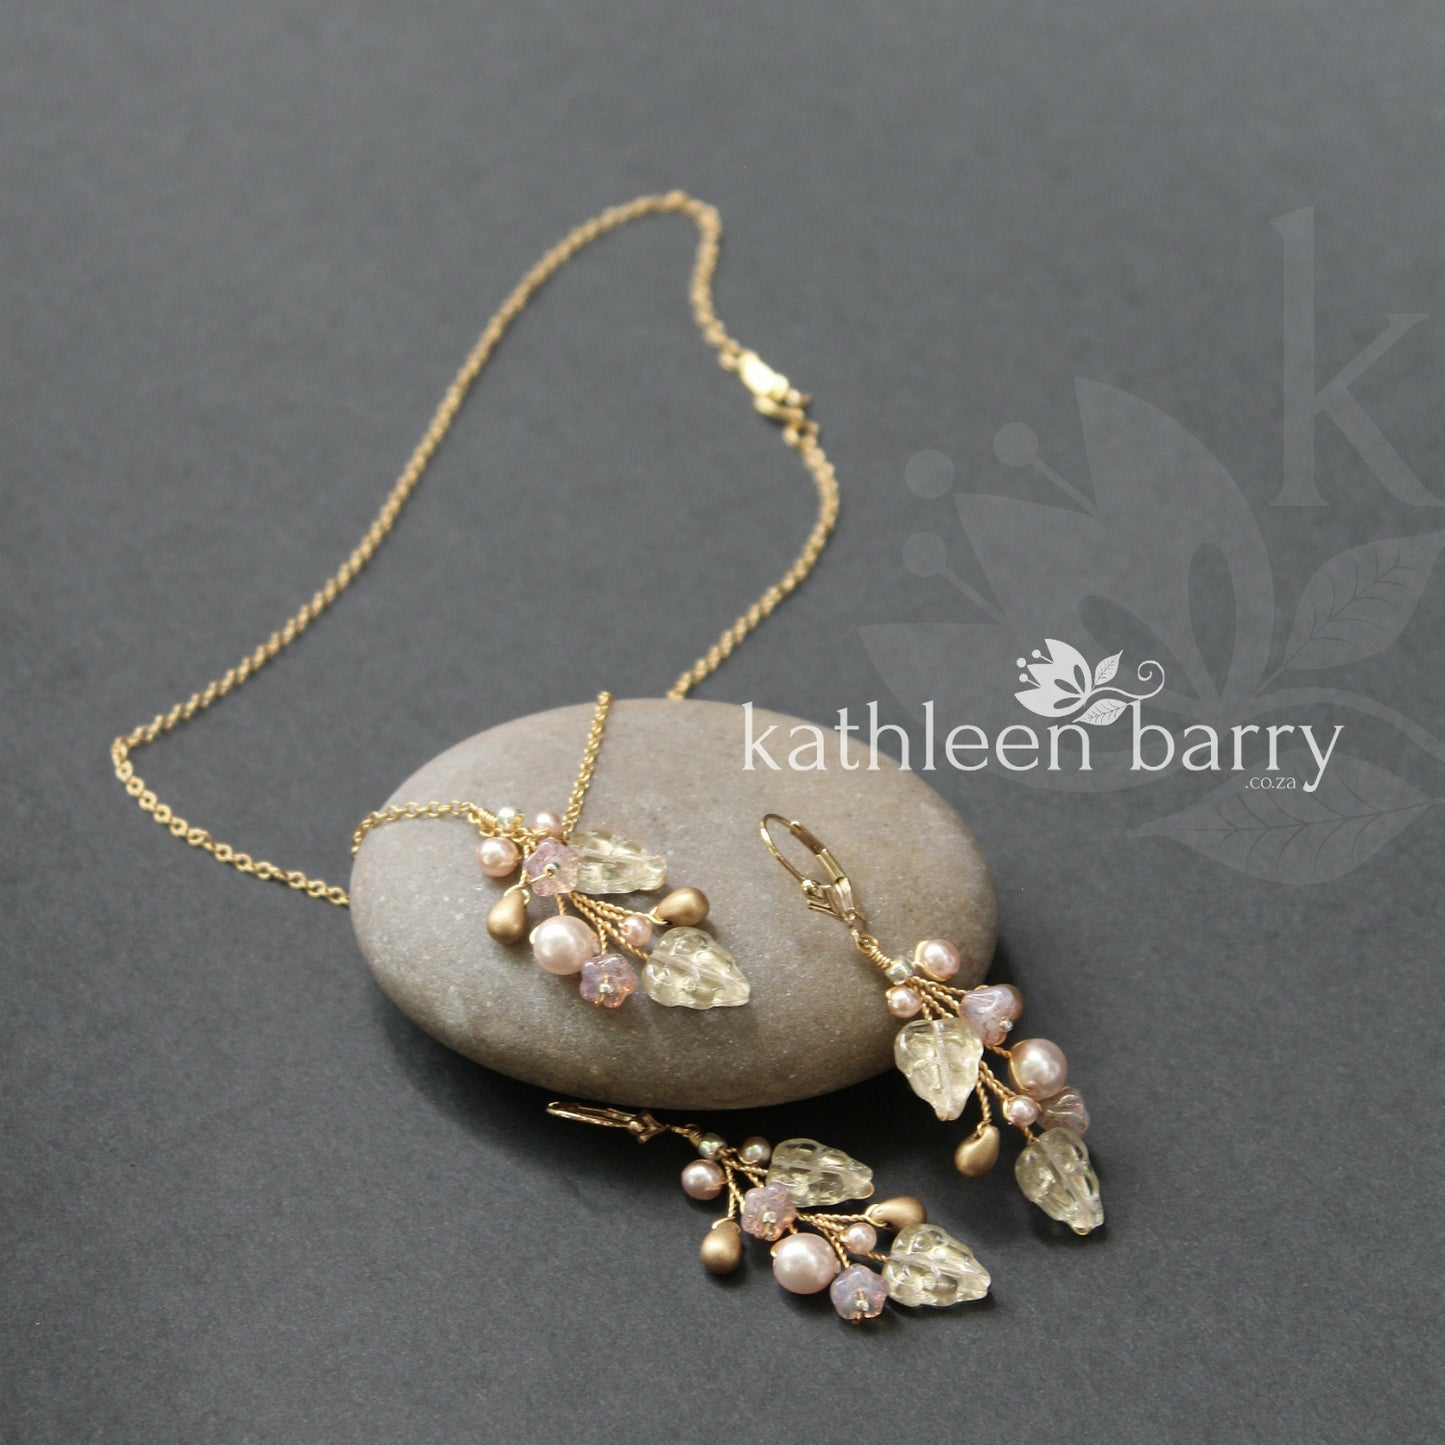 Wendy necklace and earring set - also sold individually - Gold, silver or rose gold